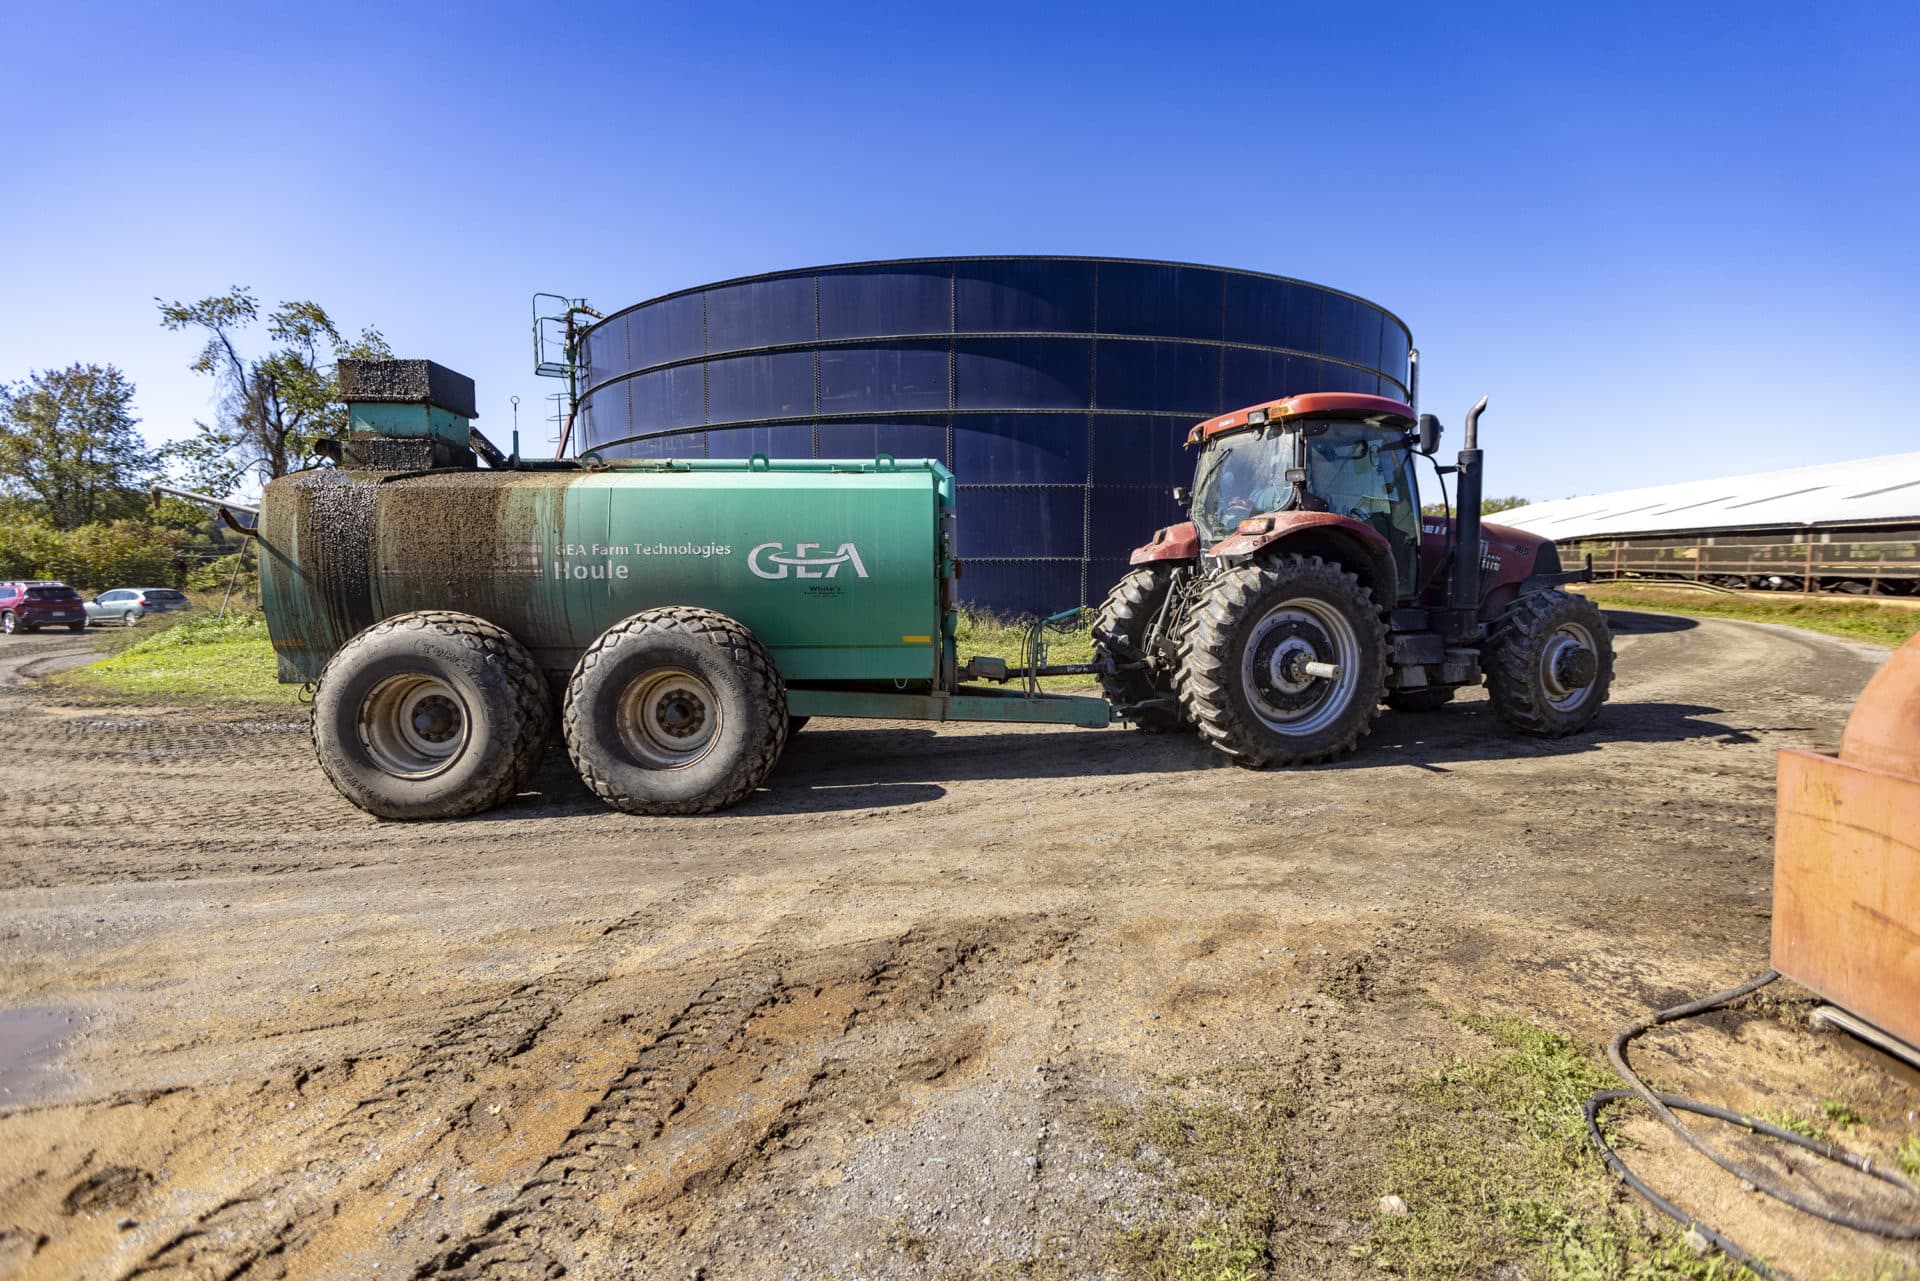 Fertilizer is produced by the anaerobic digester and stored in large blue tanks to be applied to crops at the Bar-Way Farm in Deerfield. (Jesse Costa/WBUR)